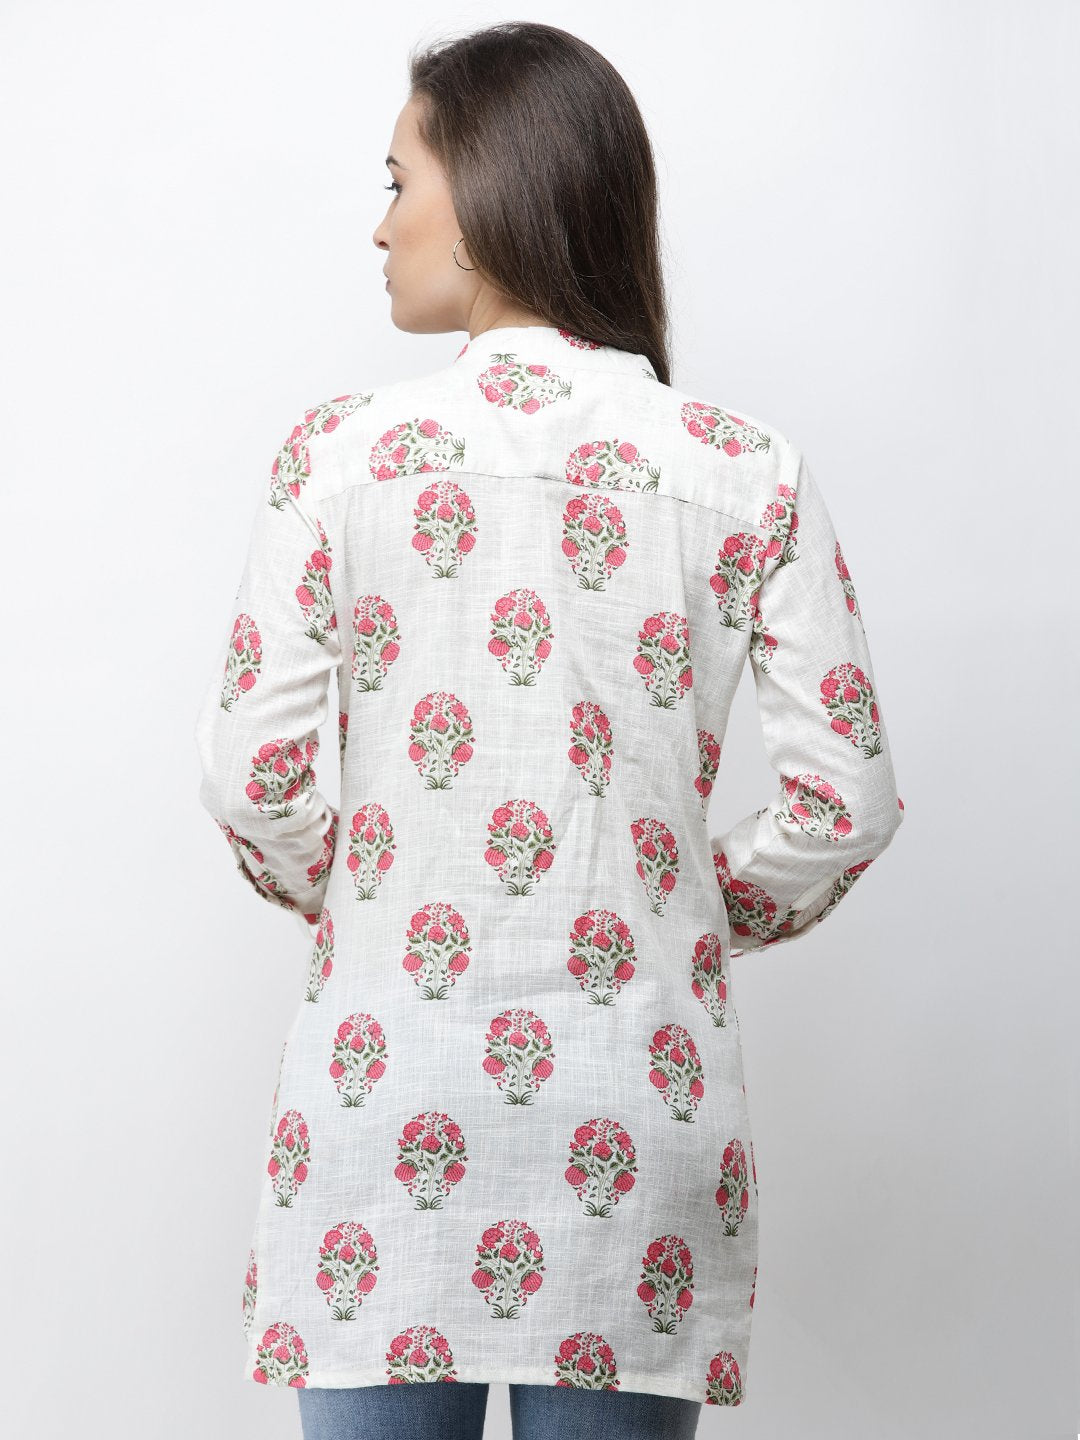 Cation Printed Tunic